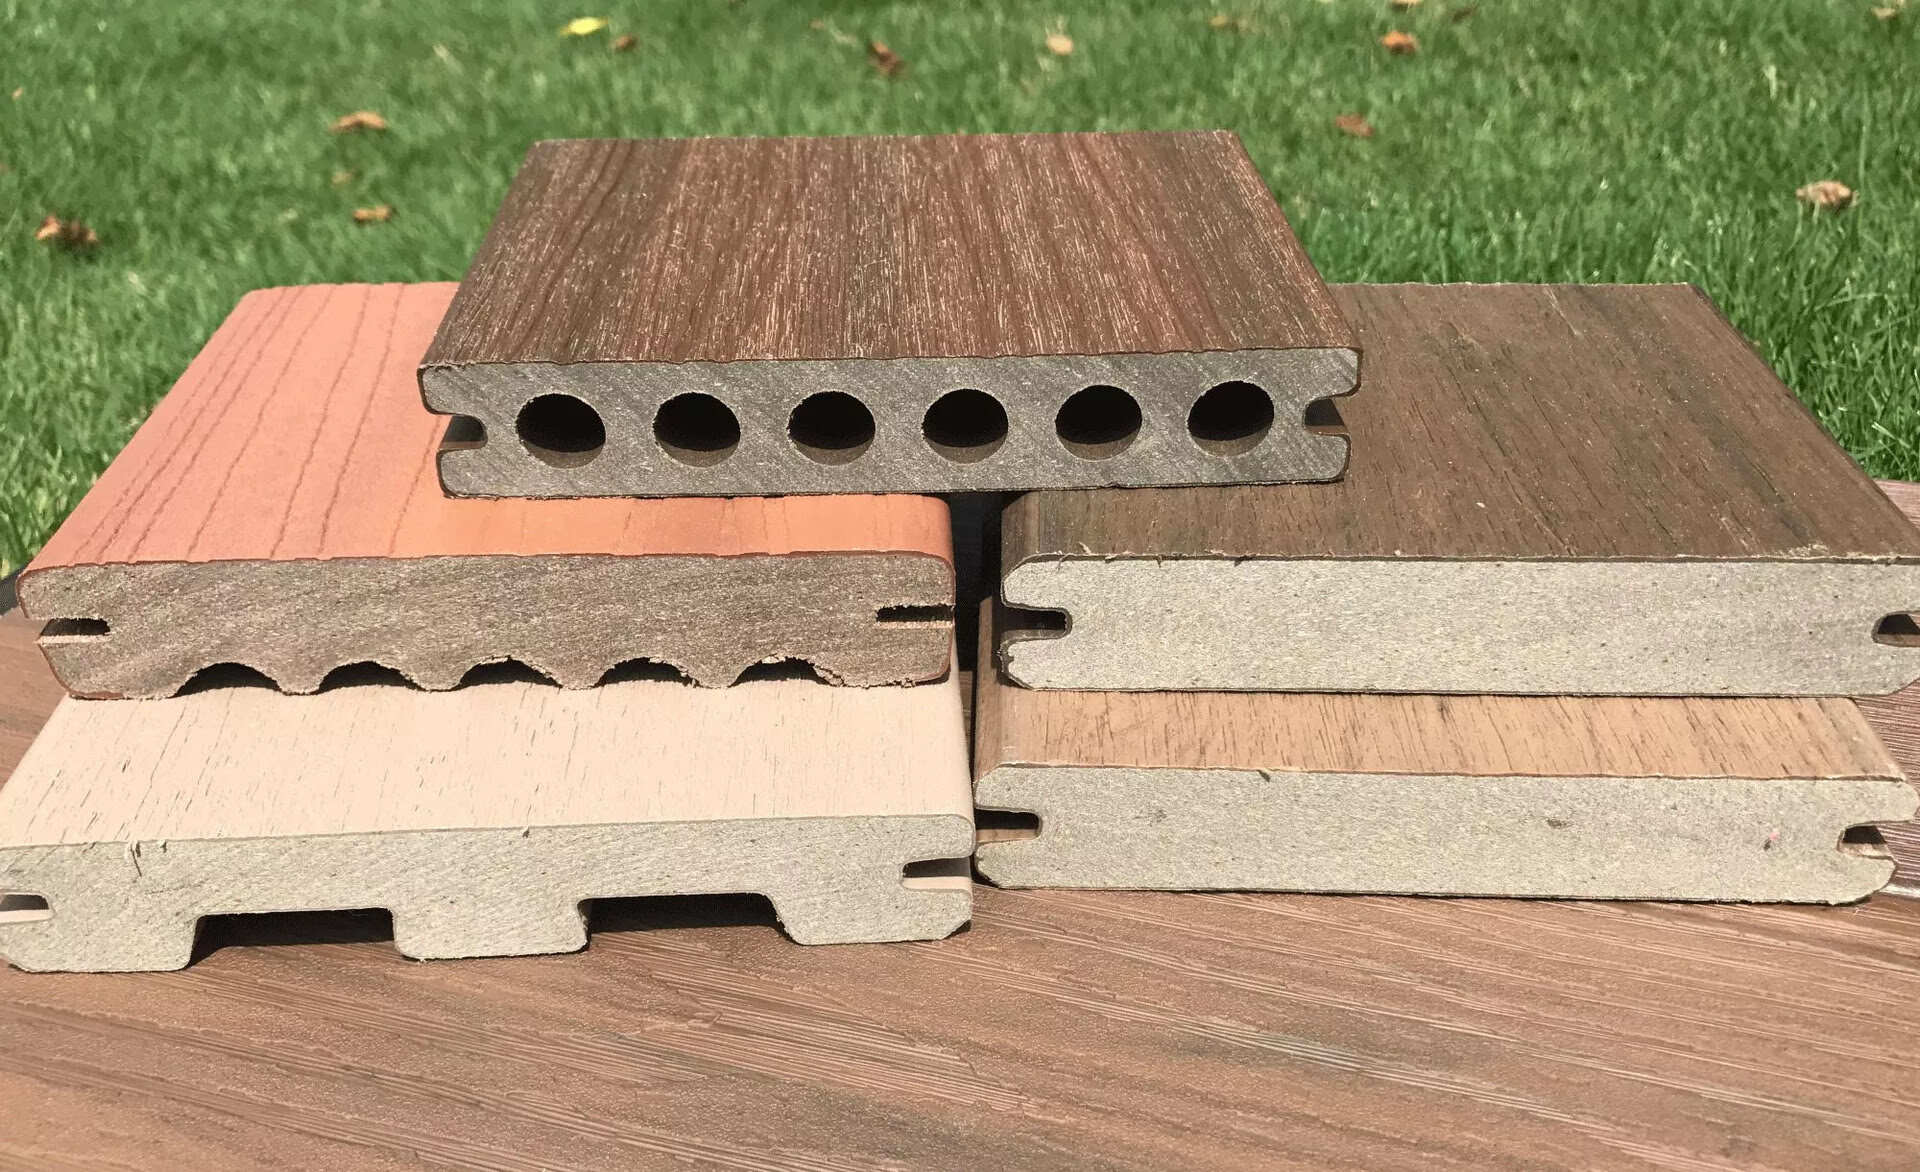 What Is Better: Composite Or Wood Decking?